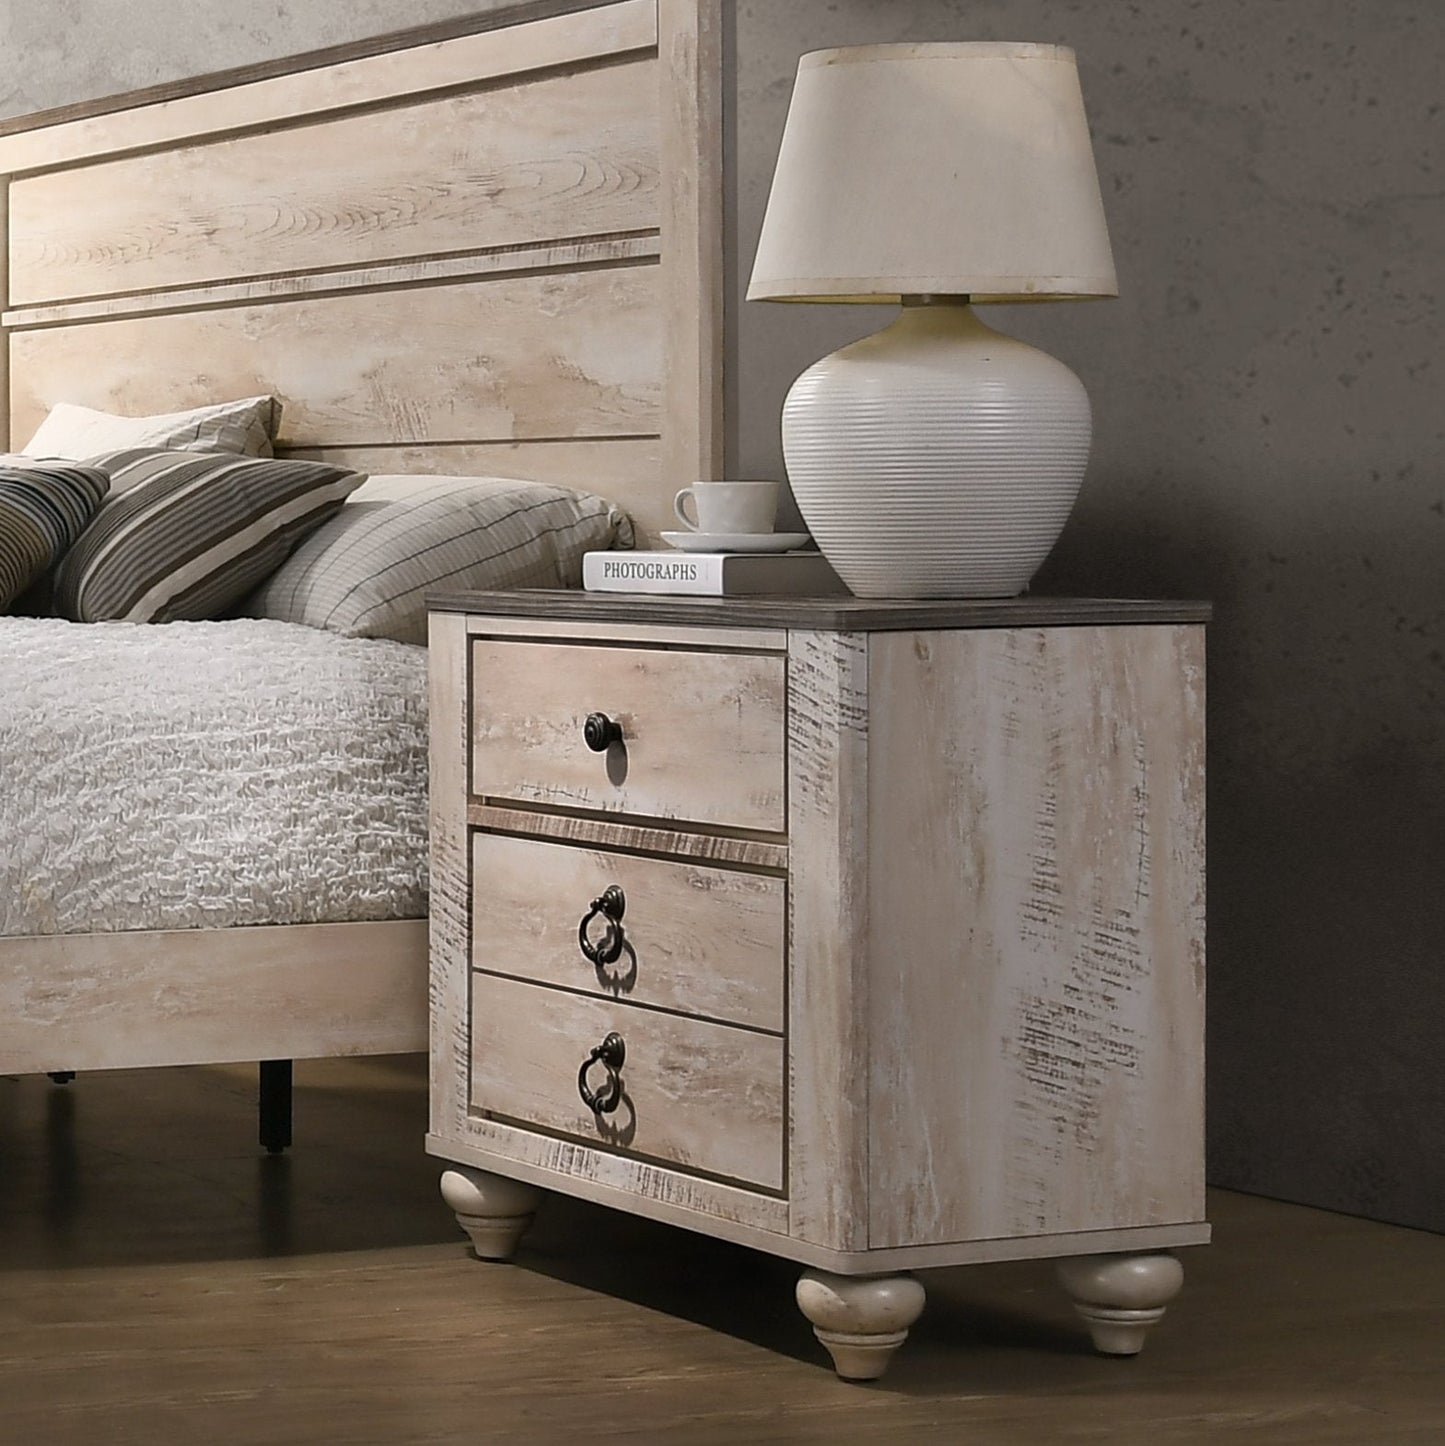 Imerland Contemporary White Wash Finish Patched Wood Top 3-drawer Nightstand